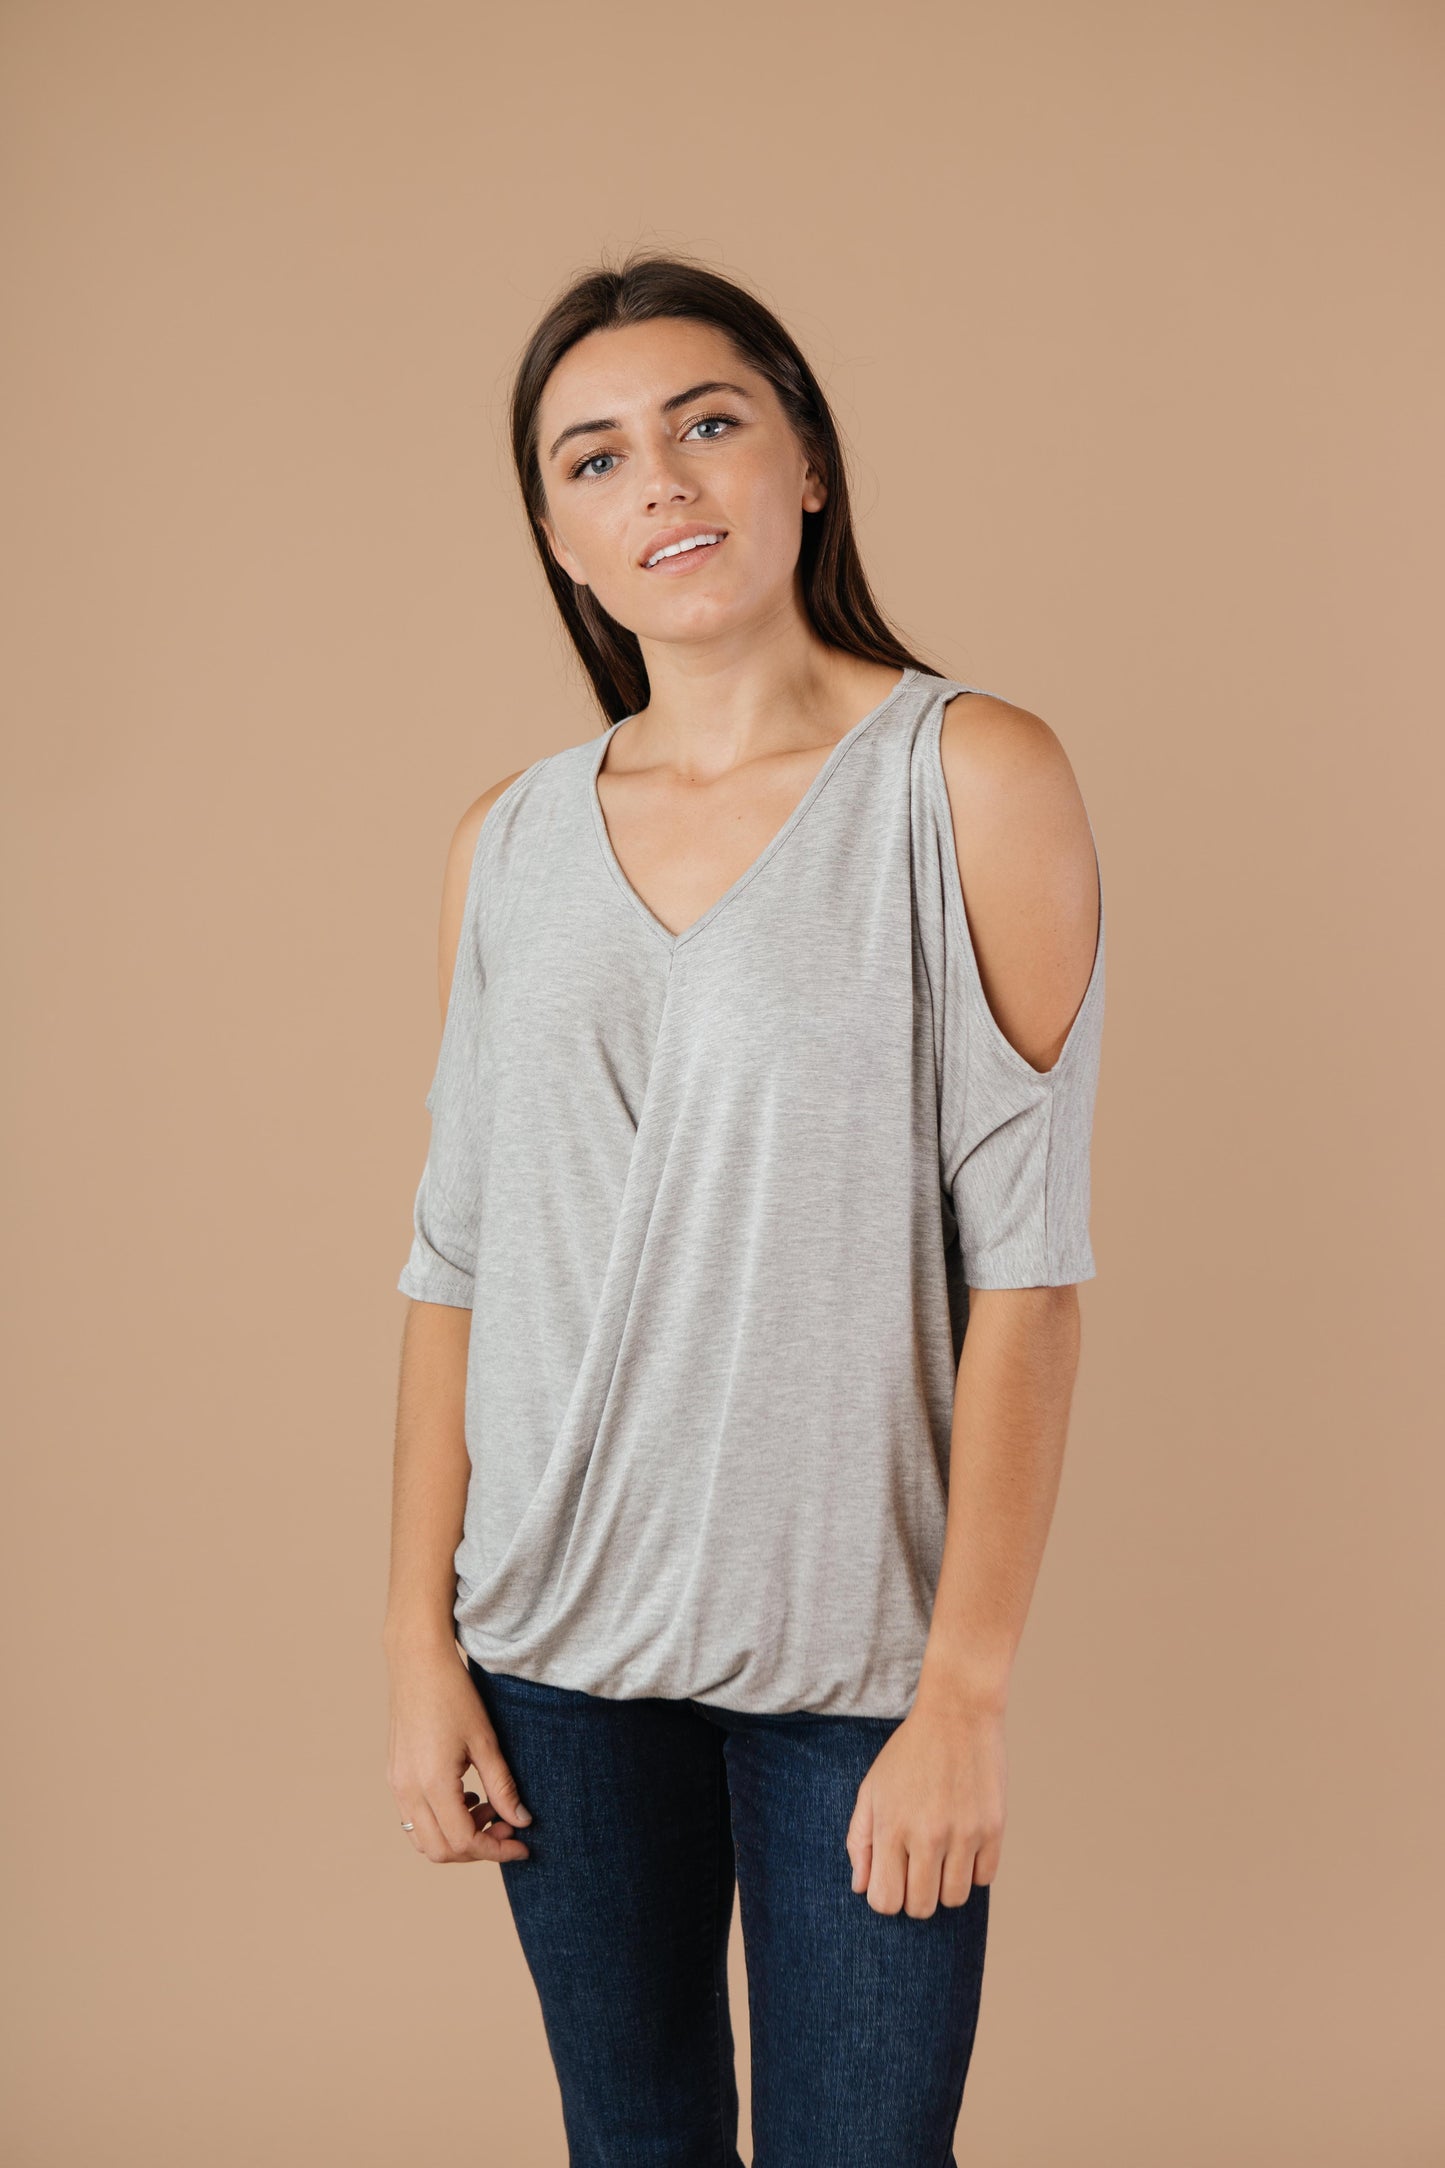 Split The Check Top In Heather Gray